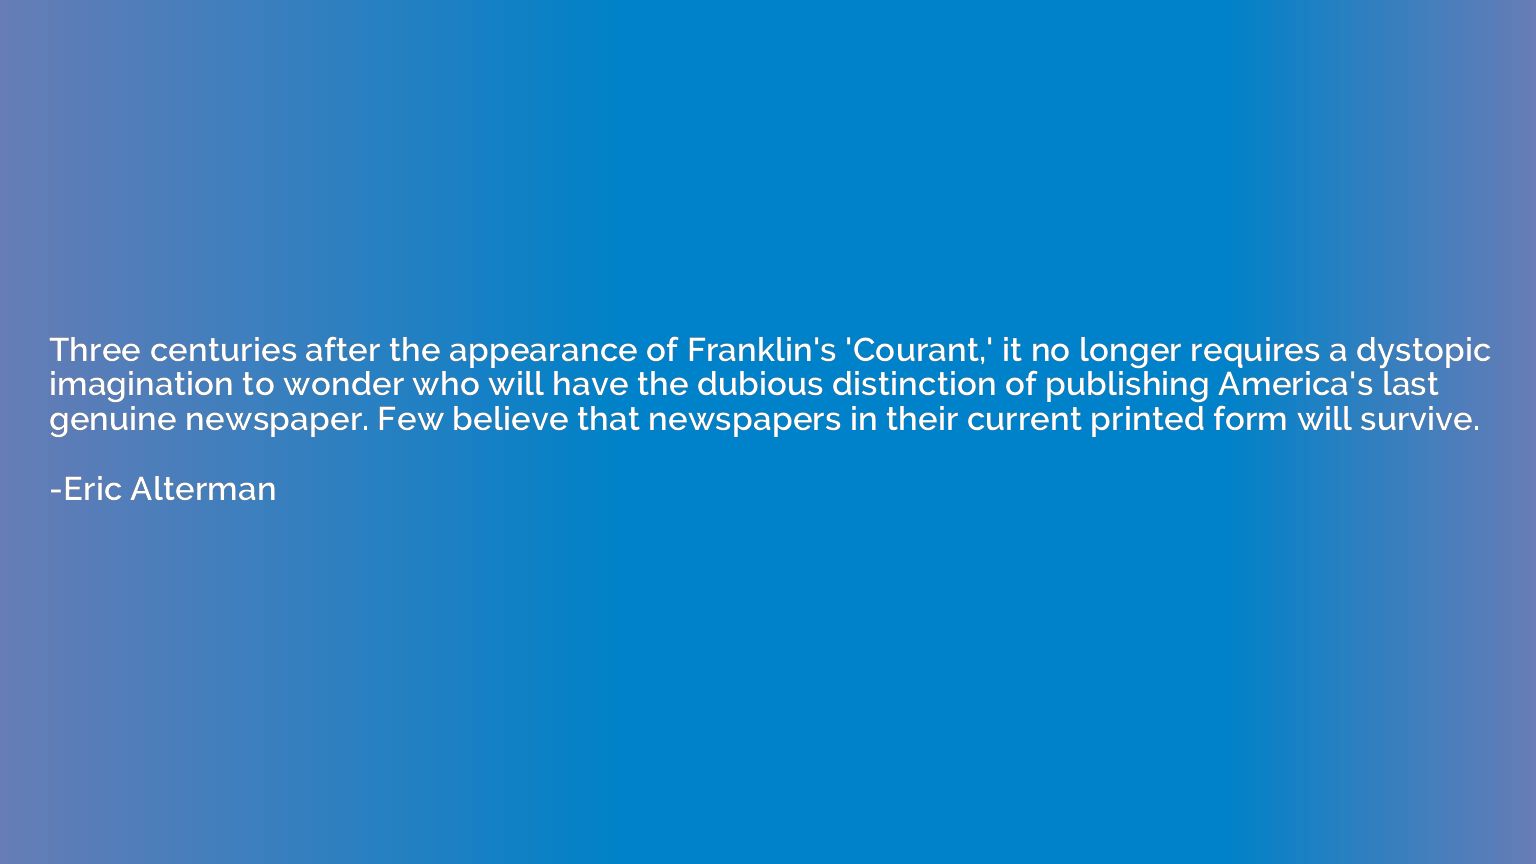 Three centuries after the appearance of Franklin's 'Courant,